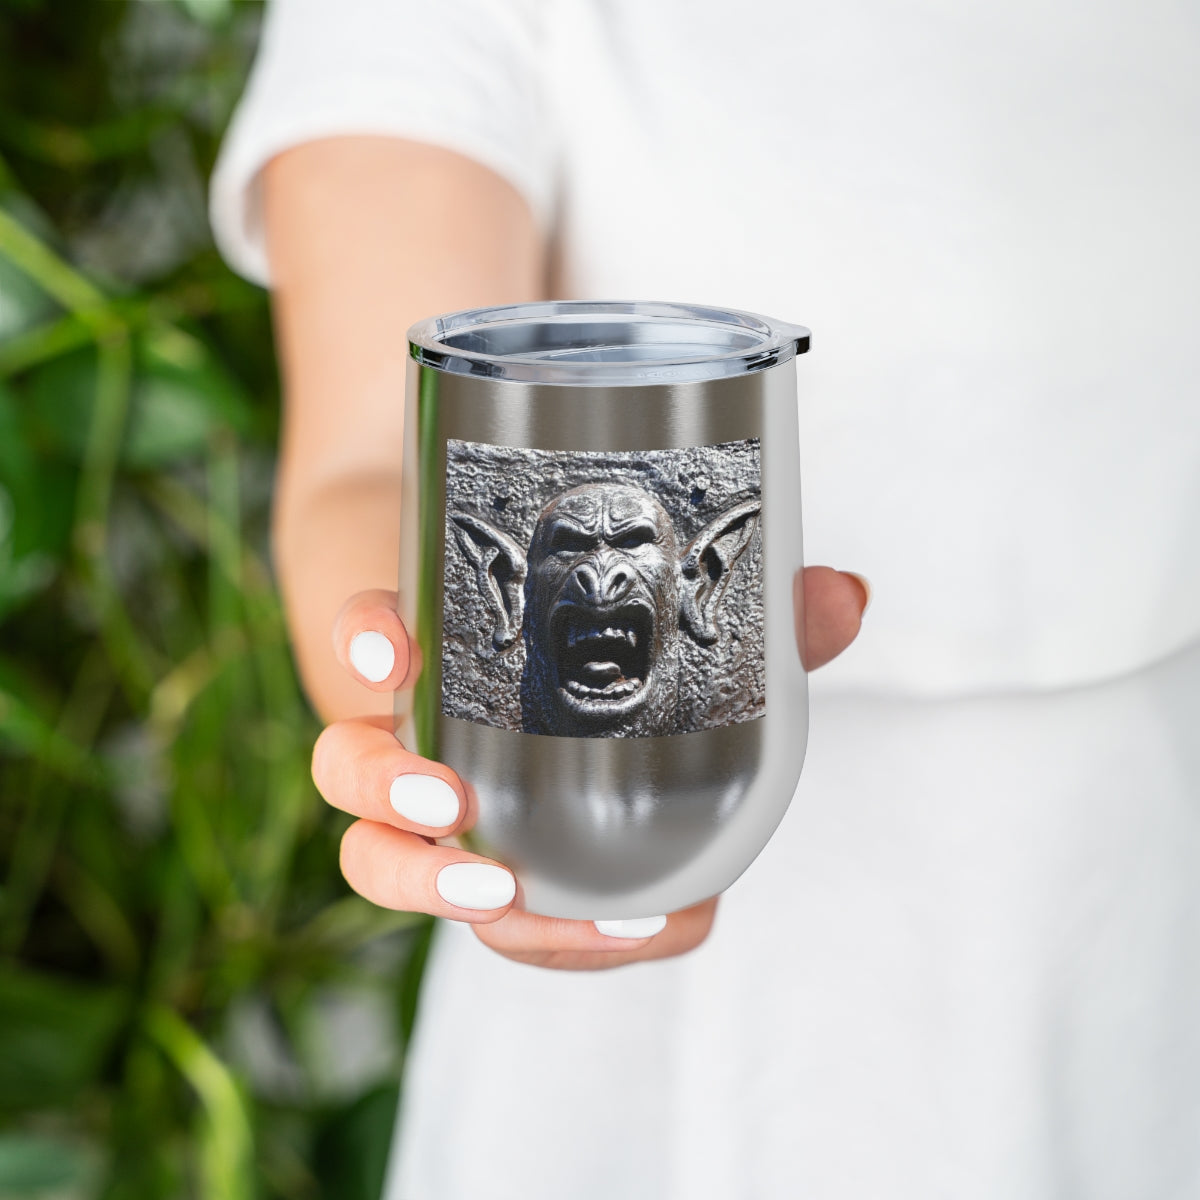 Frenzy Scream - 12 oz Insulated Wine Tumbler - Fry1Productions